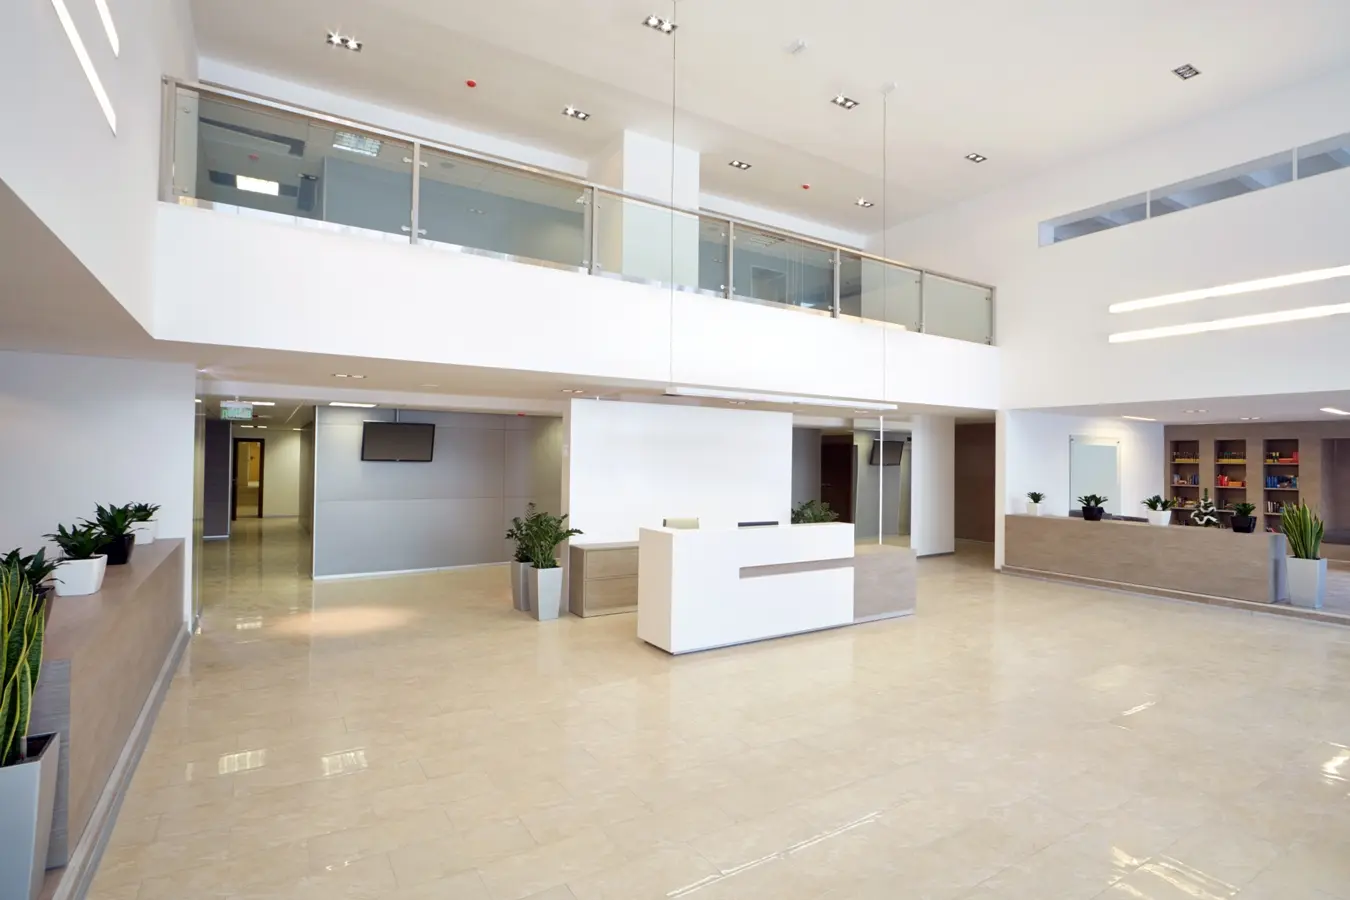 Office Space Planning & Fit Out